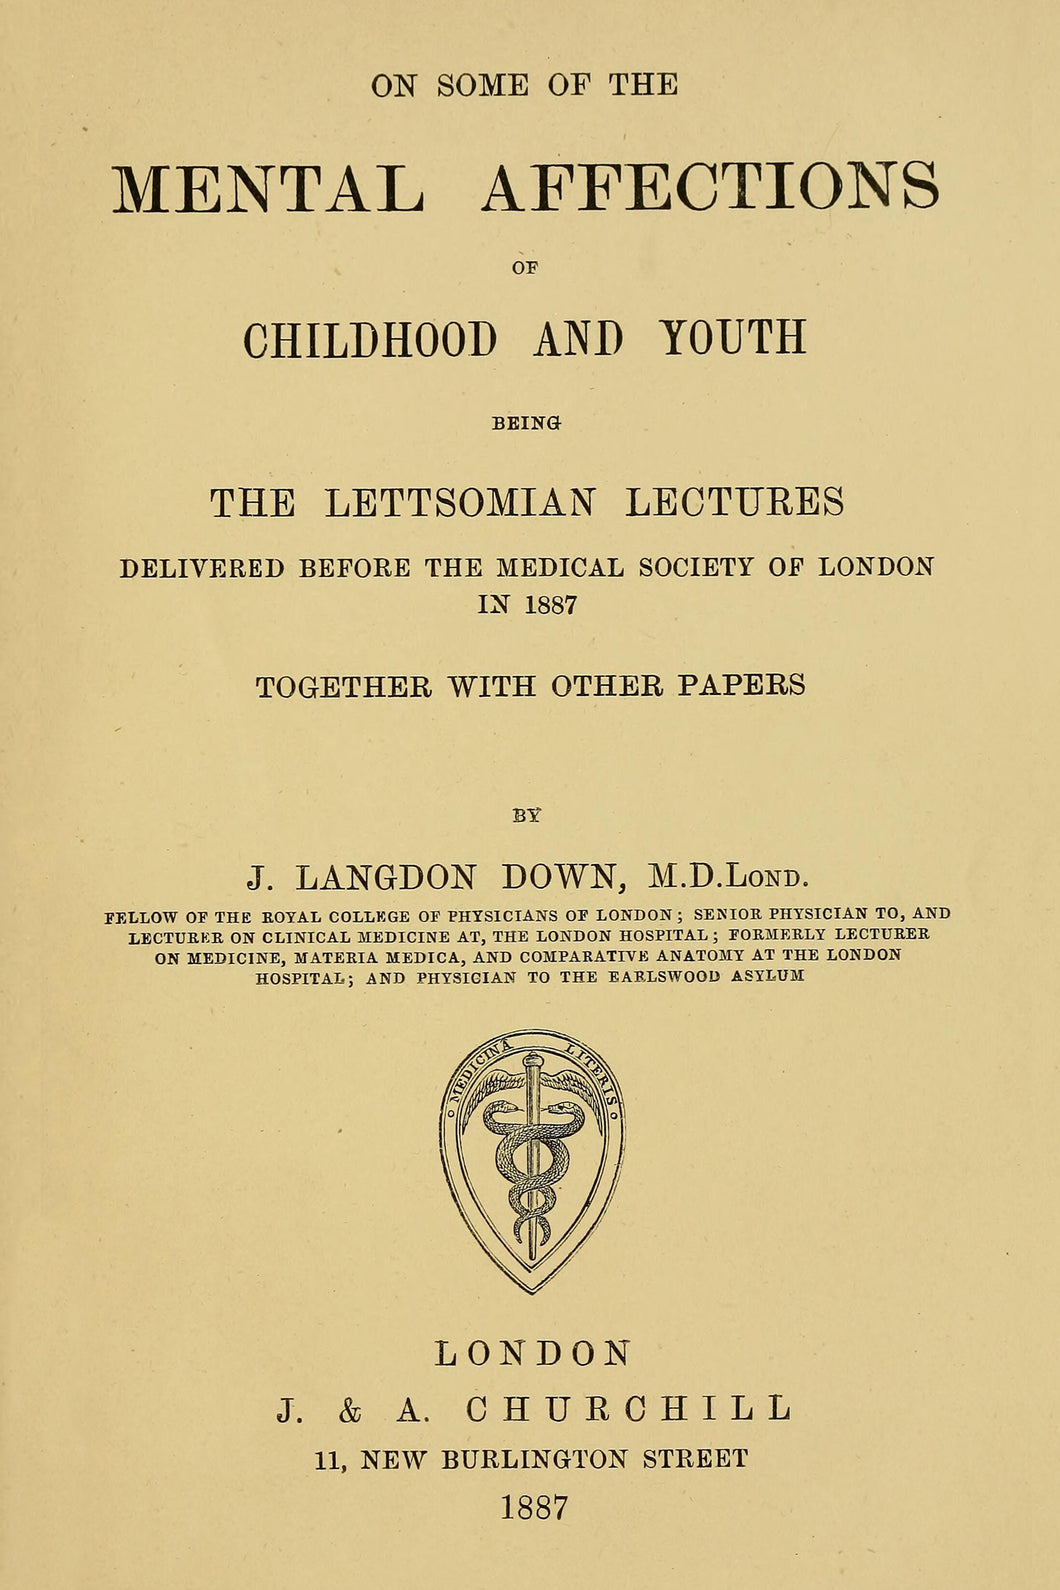 On some of the Mental Affections of Childhood and Youth being the Lettsomian Lectures..